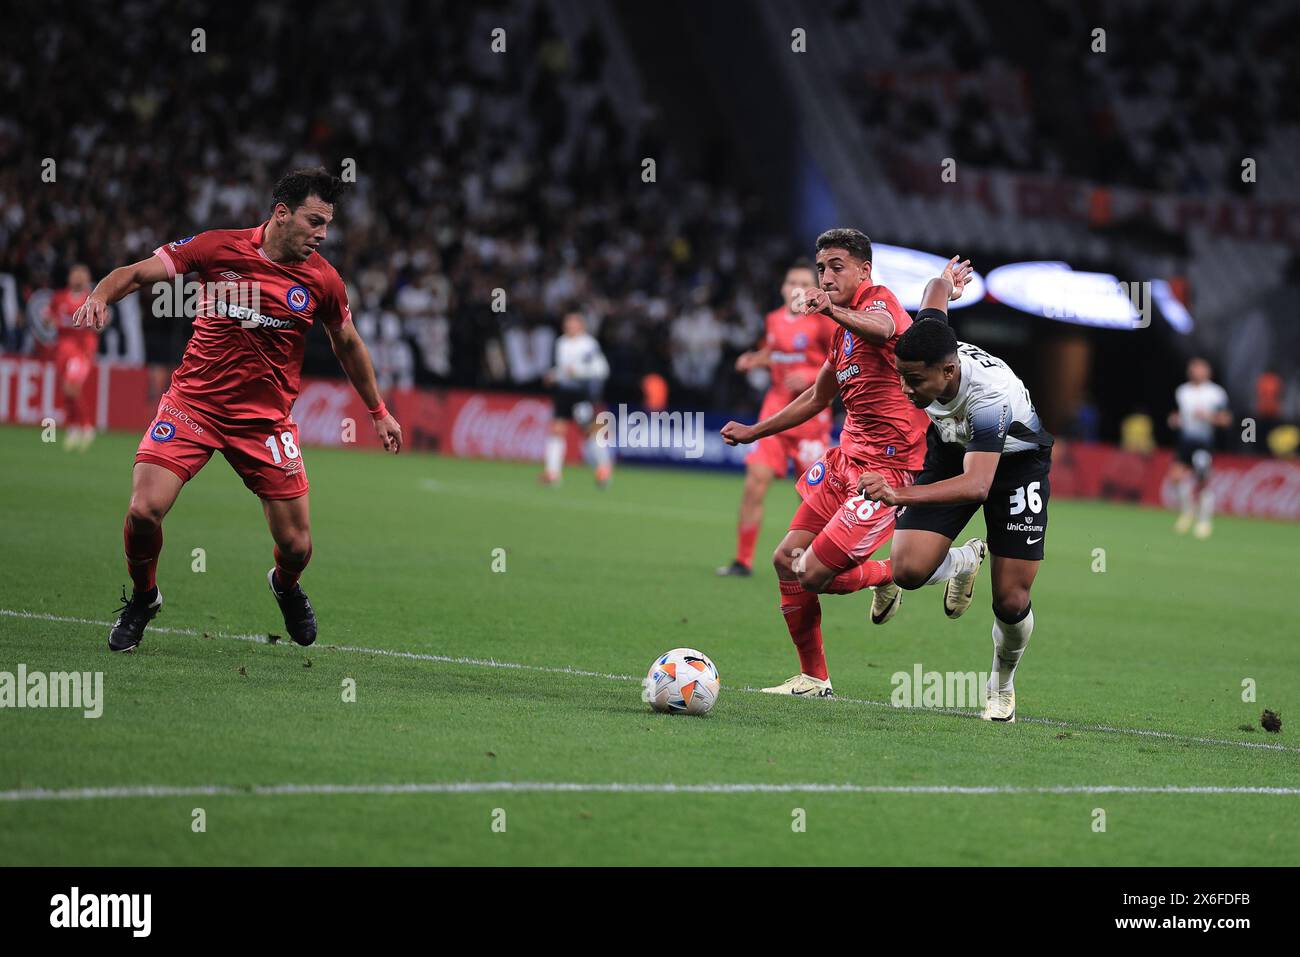 Sao Paulo, Brazil. 14th May, 2024. SP - SAO PAULO - 05/14/2024 - SOUTH AMERICAN CUP 2024, CORINTHIANS x ARGENTINOS JUNIORS - Corinthians player Wesley disputes a bid with Argentinos Juniors player Herrera during a match at the Arena Corinthians stadium for the Copa Sudamericana 2024 championship. Photo: Ettore Chiereguini/AGIF Credit: AGIF/Alamy Live News Stock Photo